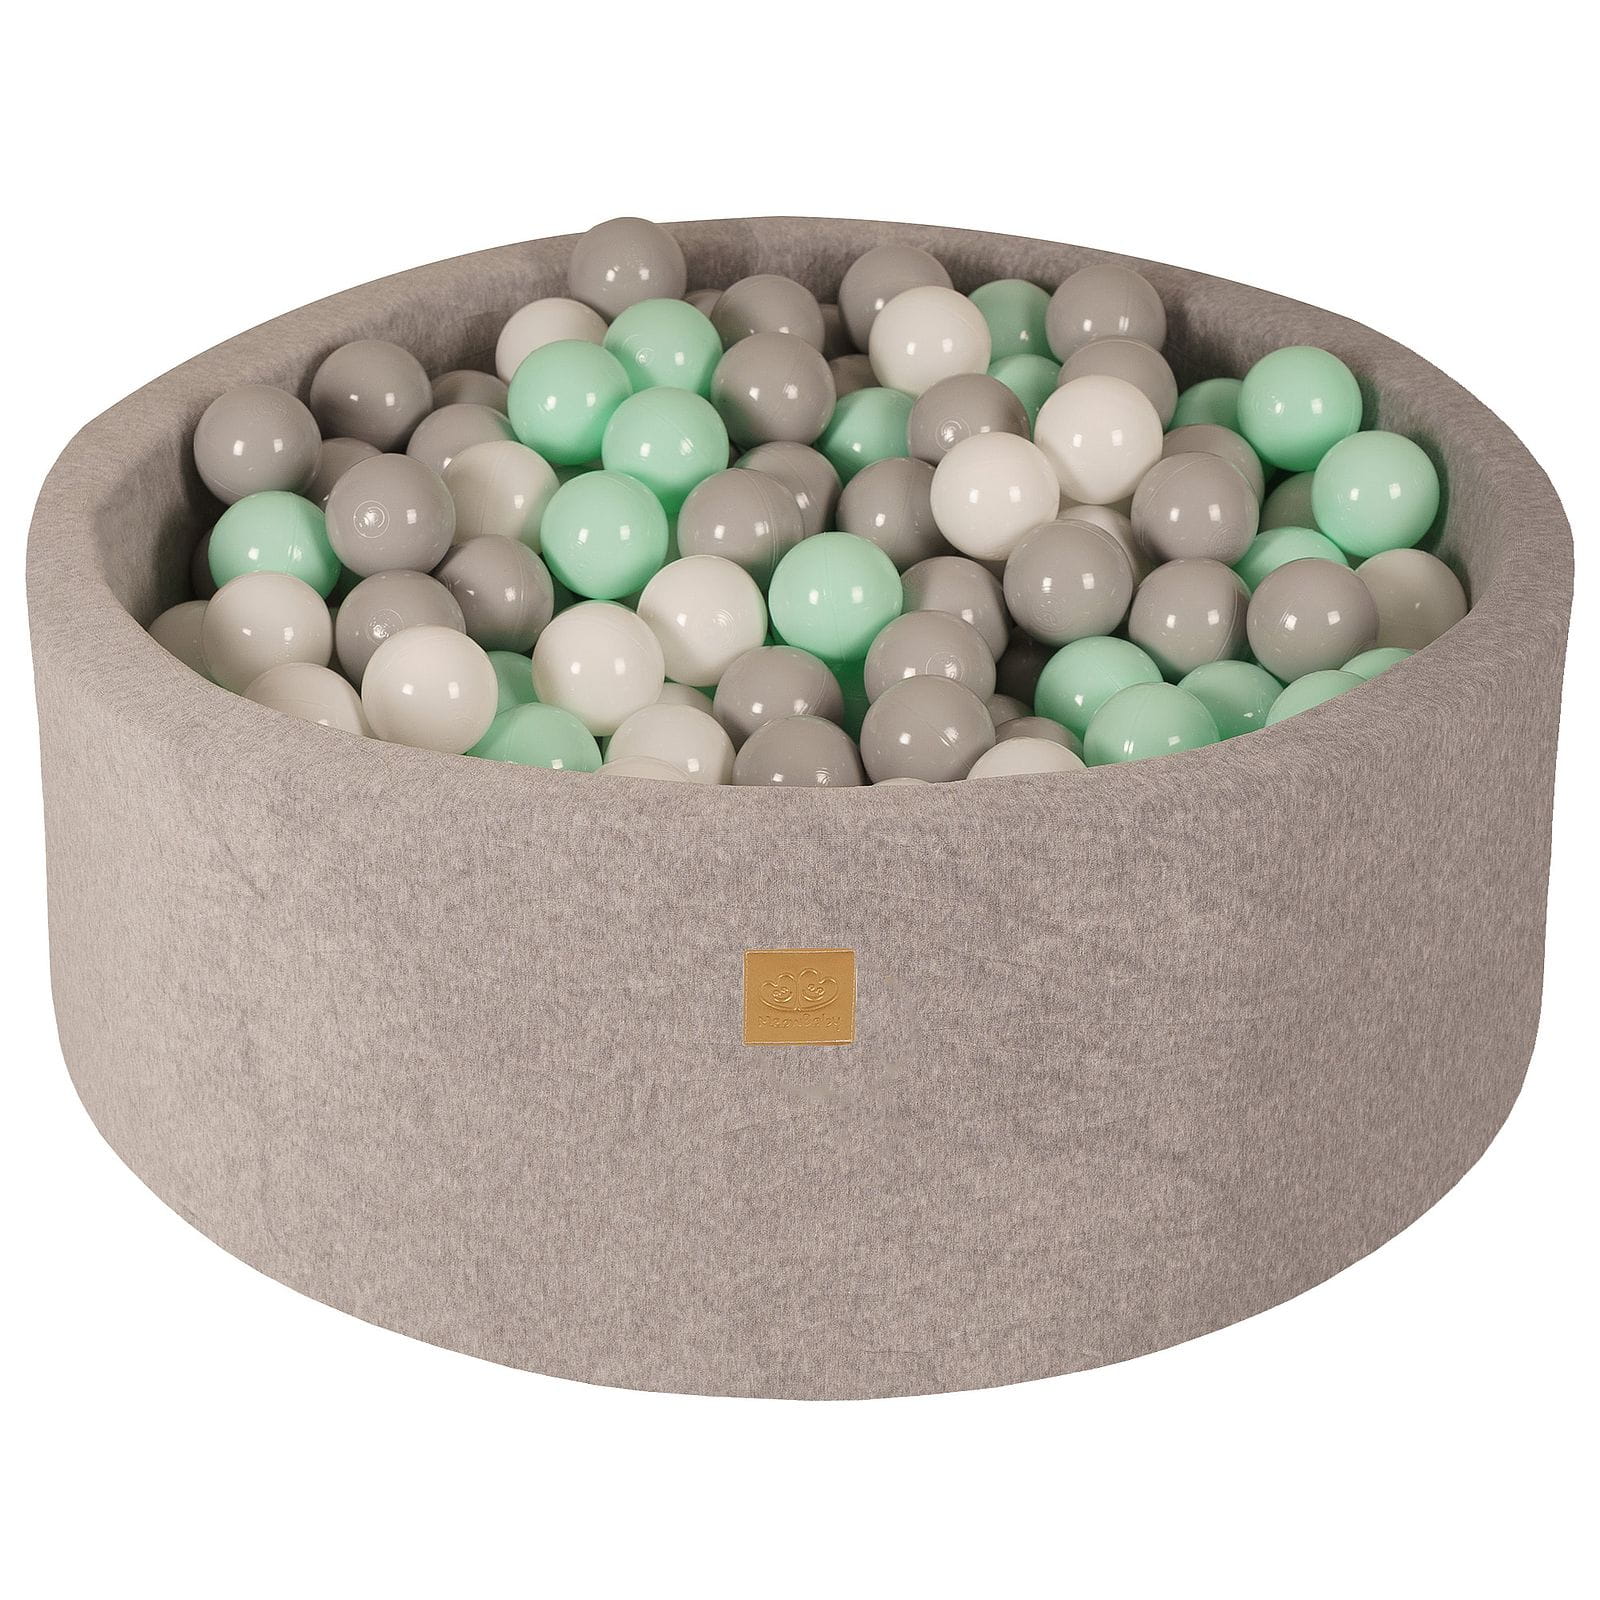 MEOW BABY Ball Pit with 200 Balls 2.75in Included for Toddlers - Baby Soft Foam Round Playpen, Velvet, Light Gray: White/Gray/Mint